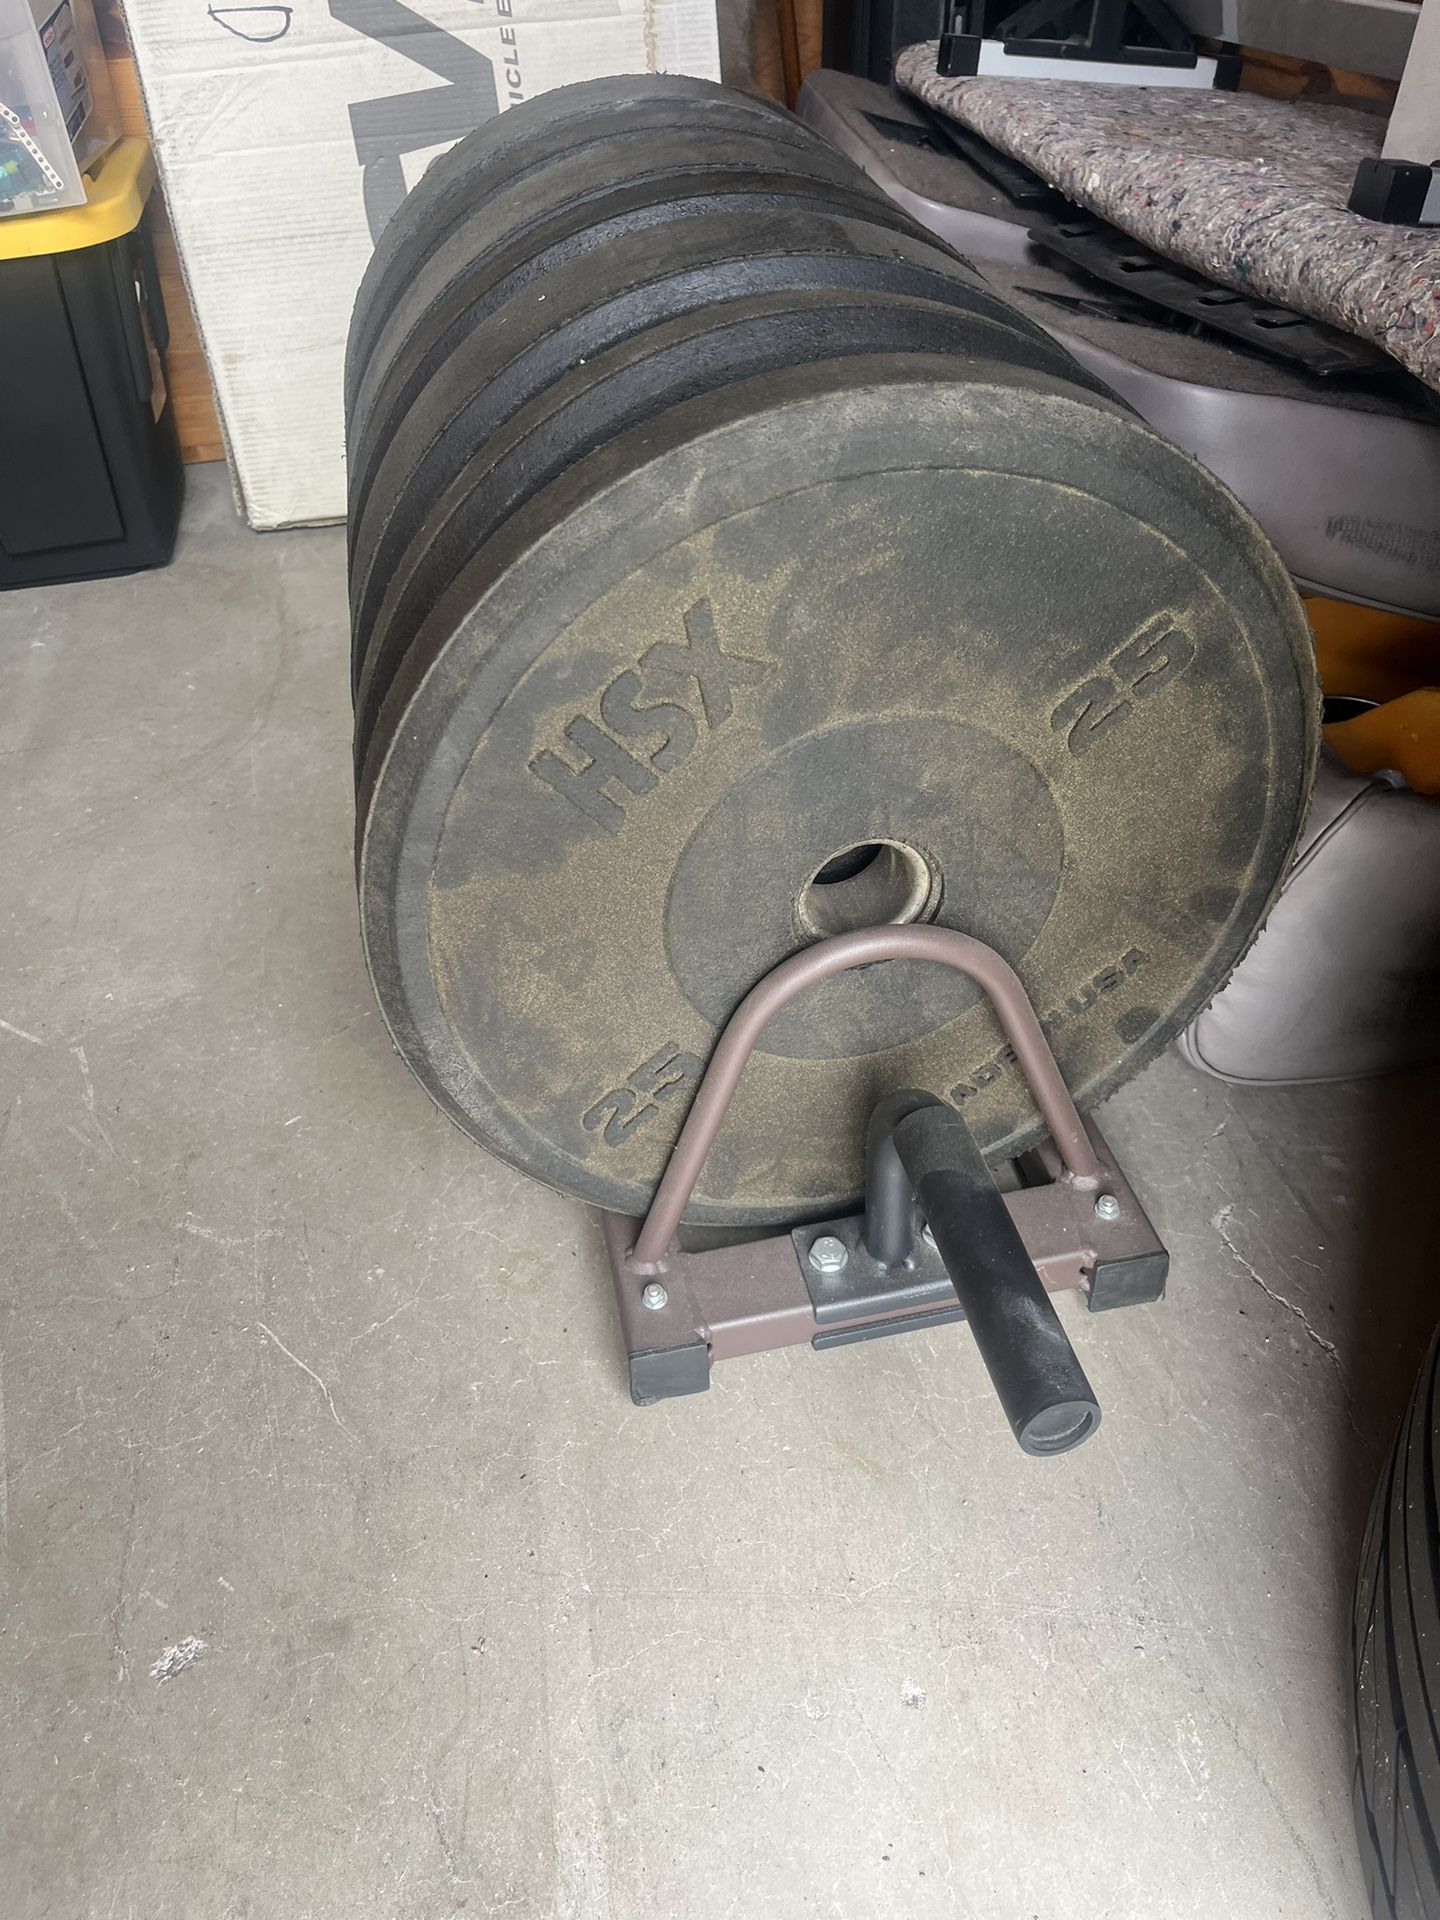 Weight Set With Barbell And clips